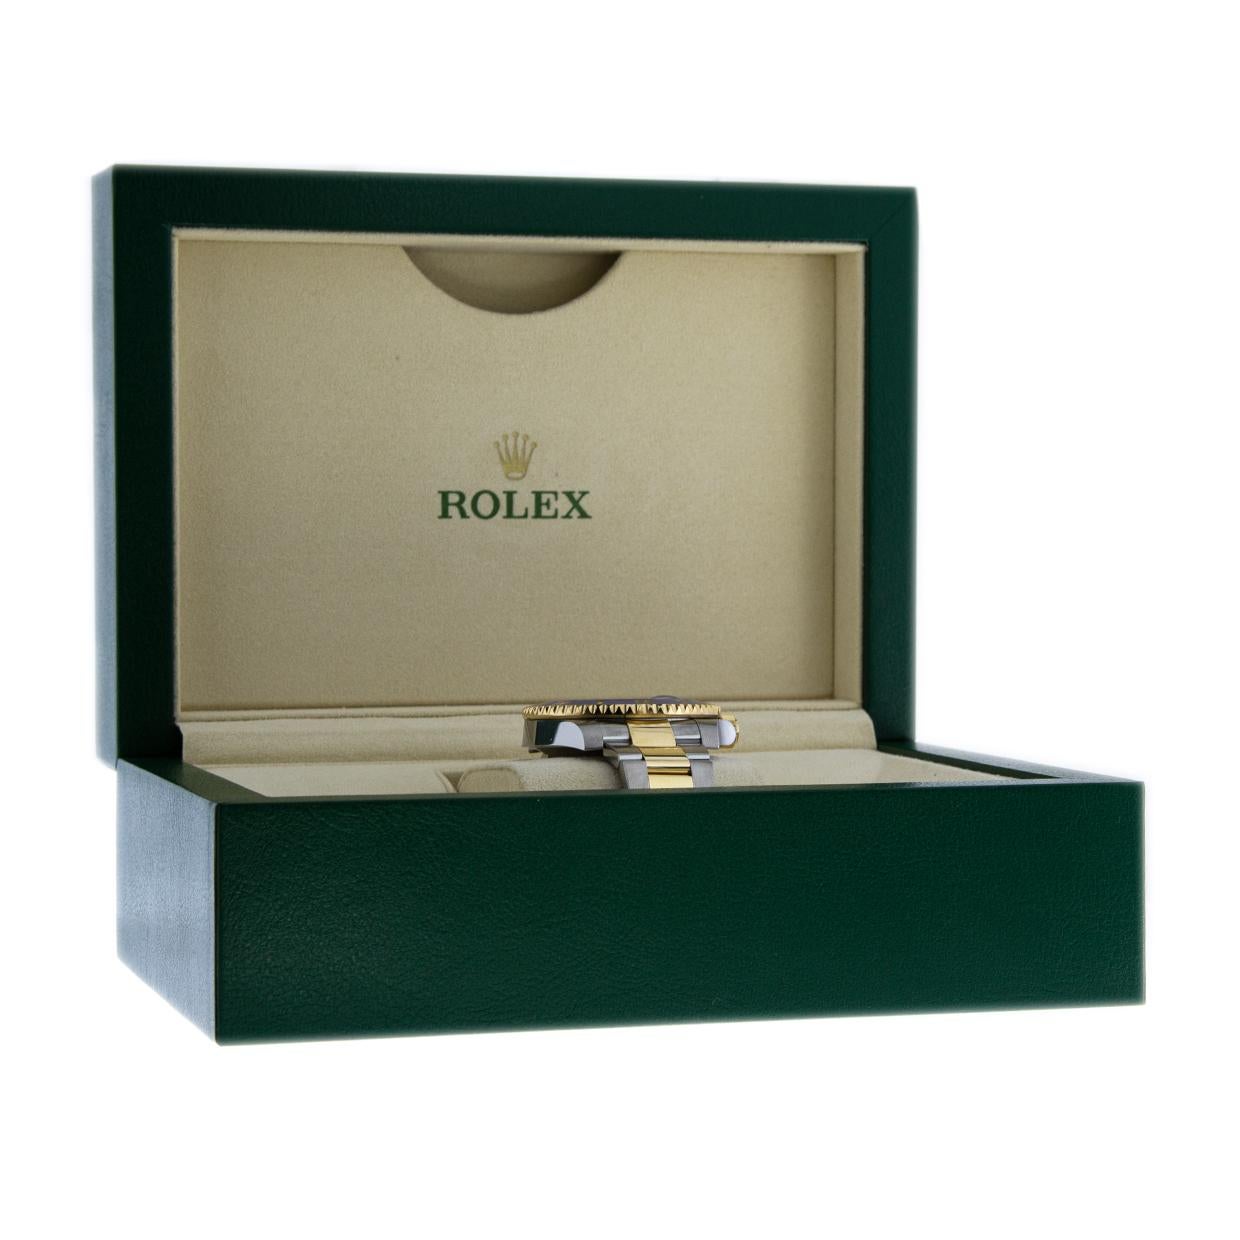 Item Details
Estimated Retail $13,810.00
Brand Rolex
Case Material Stainless Steel & 18K Yellow Gold
Gender Mens
MPN 116613LB
Movement Mechanical Automatic
Face Color Blue
Band Type Oyster Bracelet
Case Size 40 mm
Style Diver
Cert/Paperwork Box &